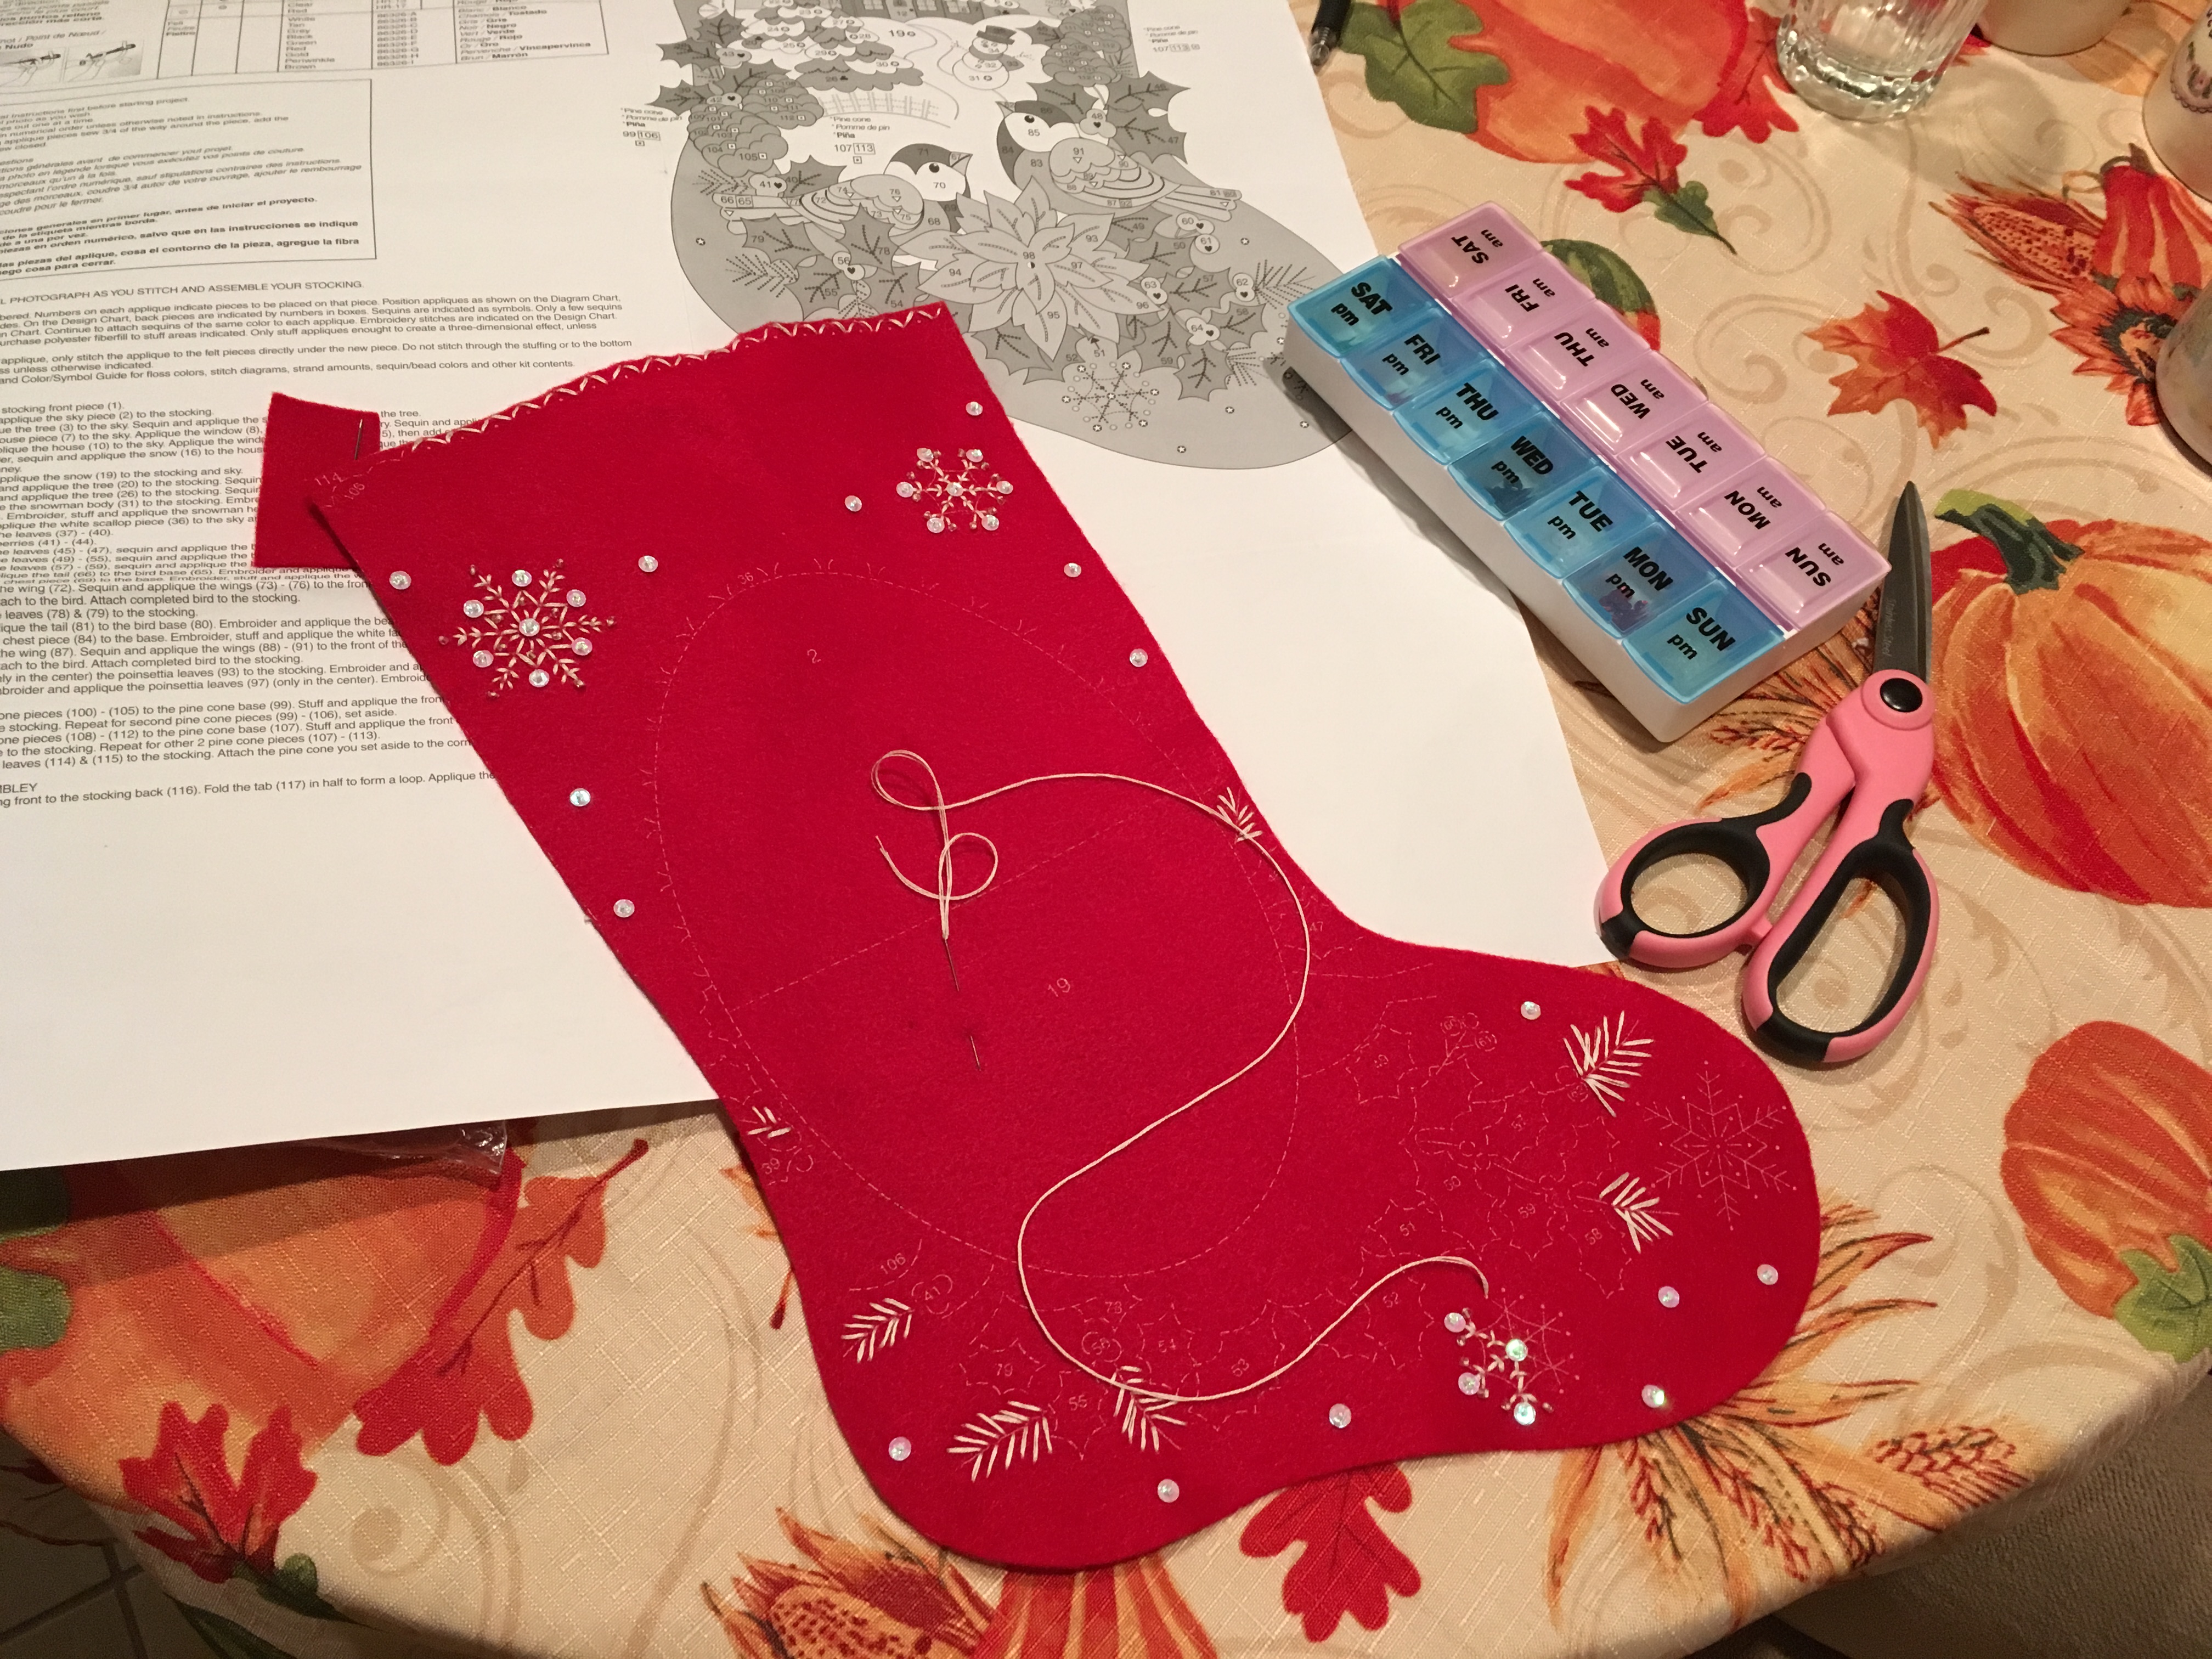 Bucilla stocking finished in time for Christmas! It's all hand work with  felt and embroidery : r/Embroidery